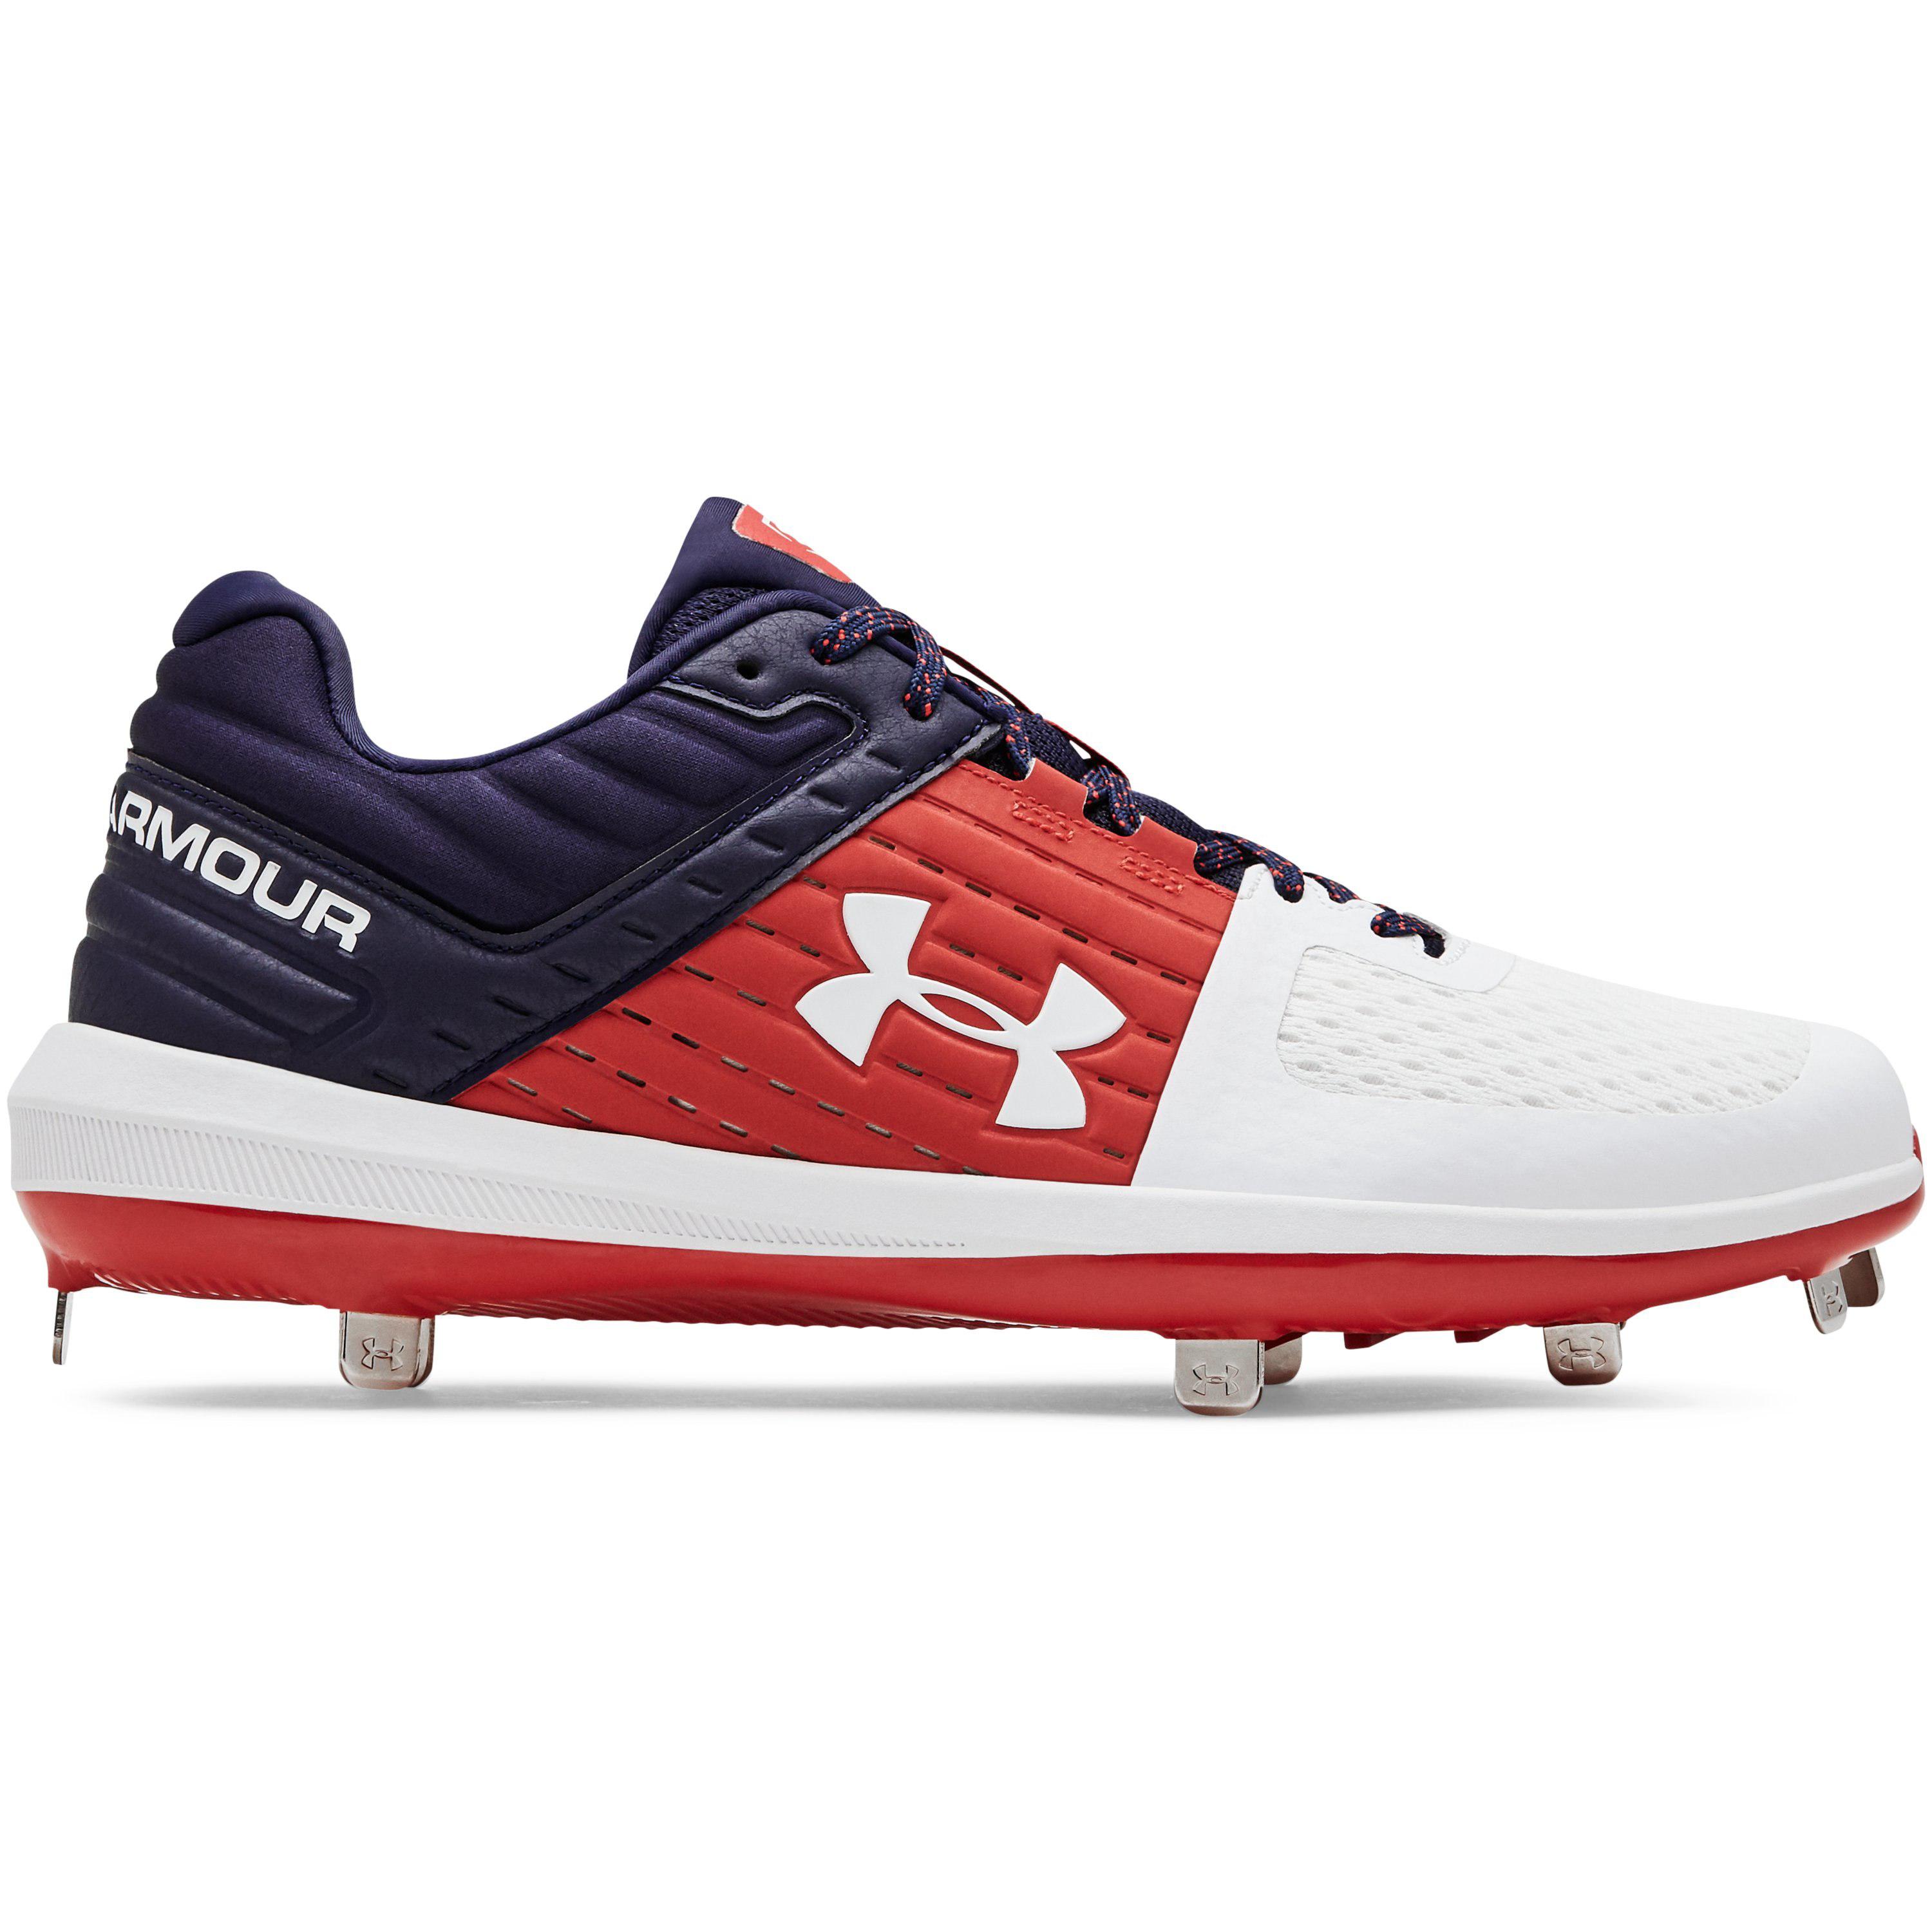 NEW UNDER ARMOUR Yard Low St Baseball Cleat Homme Taille 9.0 3000353 Blanc Marine 